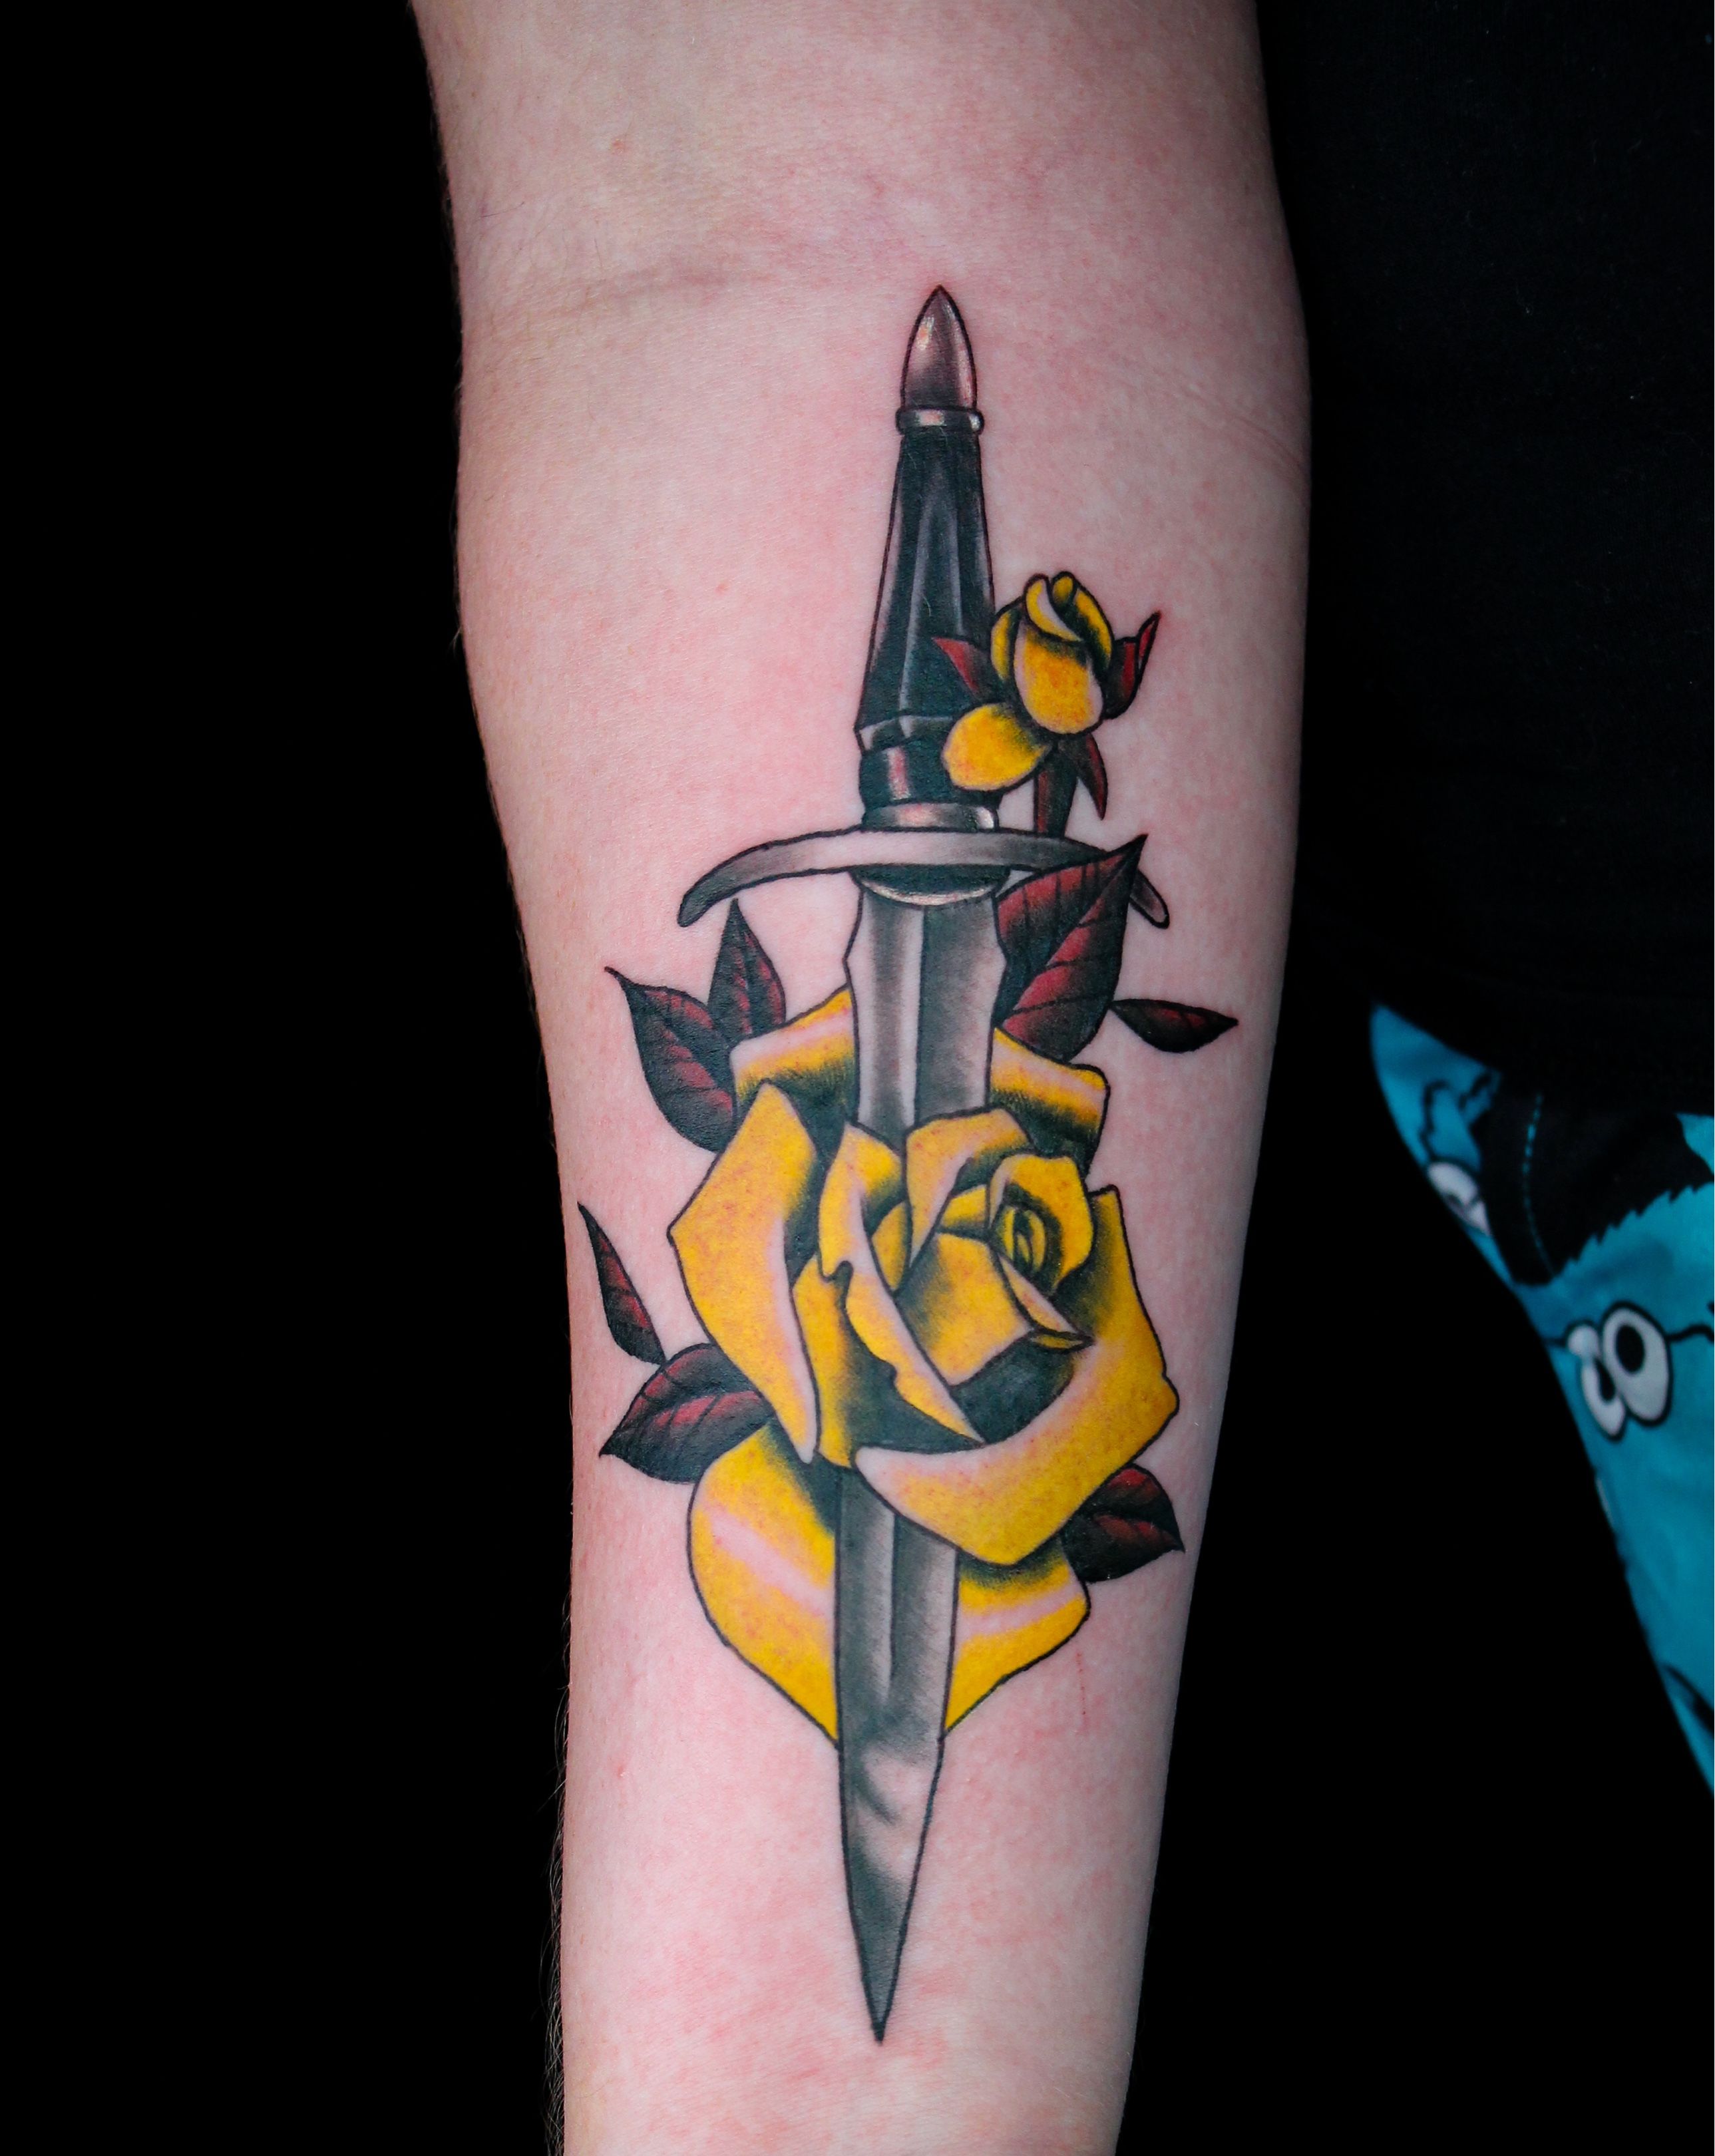 Yellow rose by Mary Funderburk at Jinx Proof in Washington, DC : r/tattoos